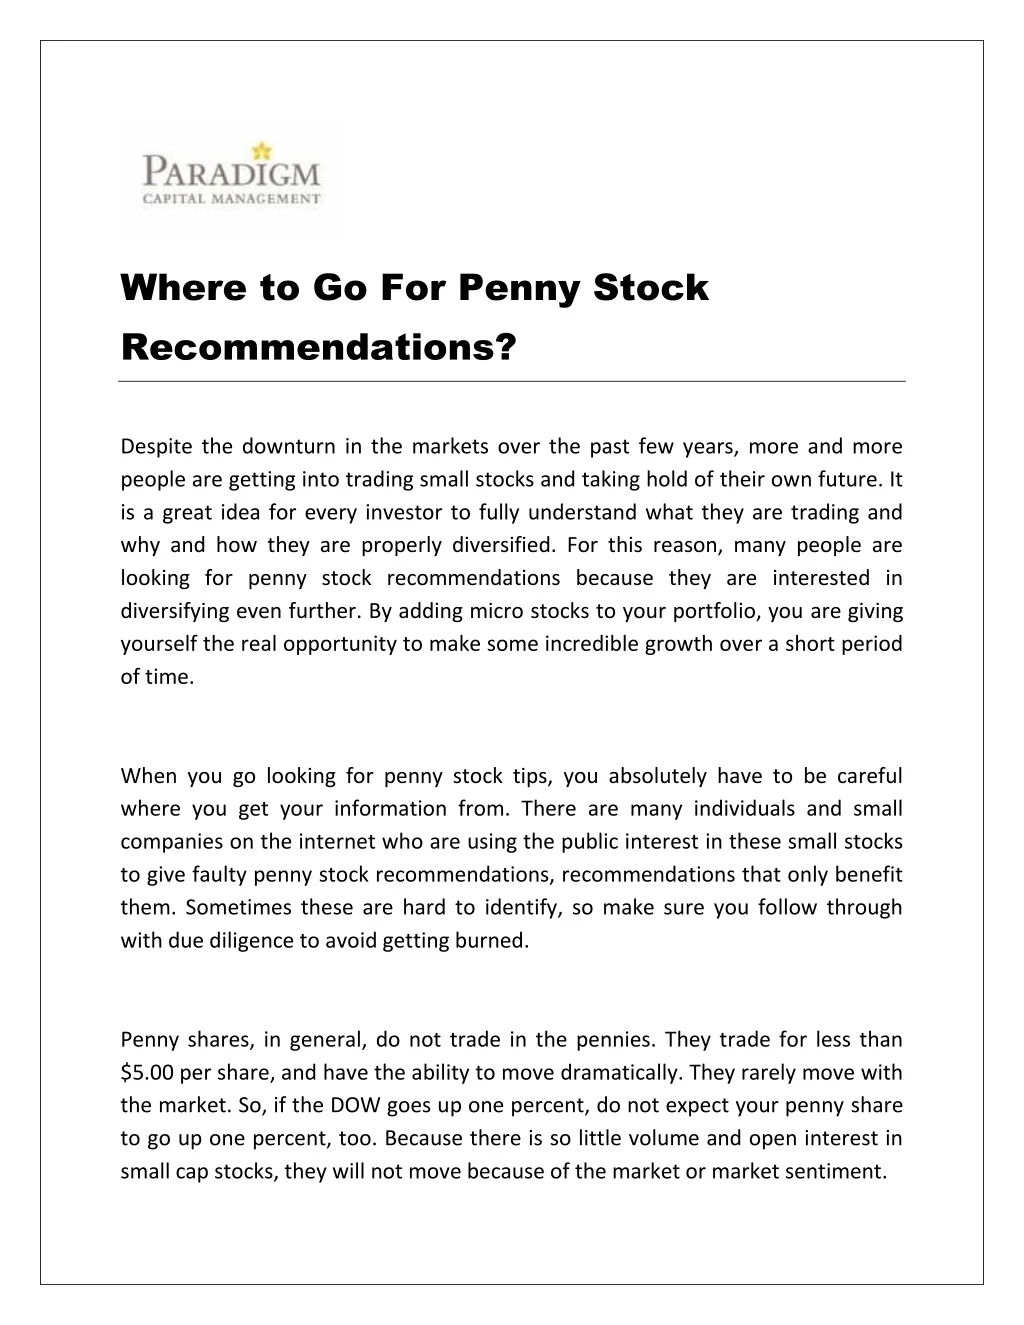 where to go for penny stock recommendations